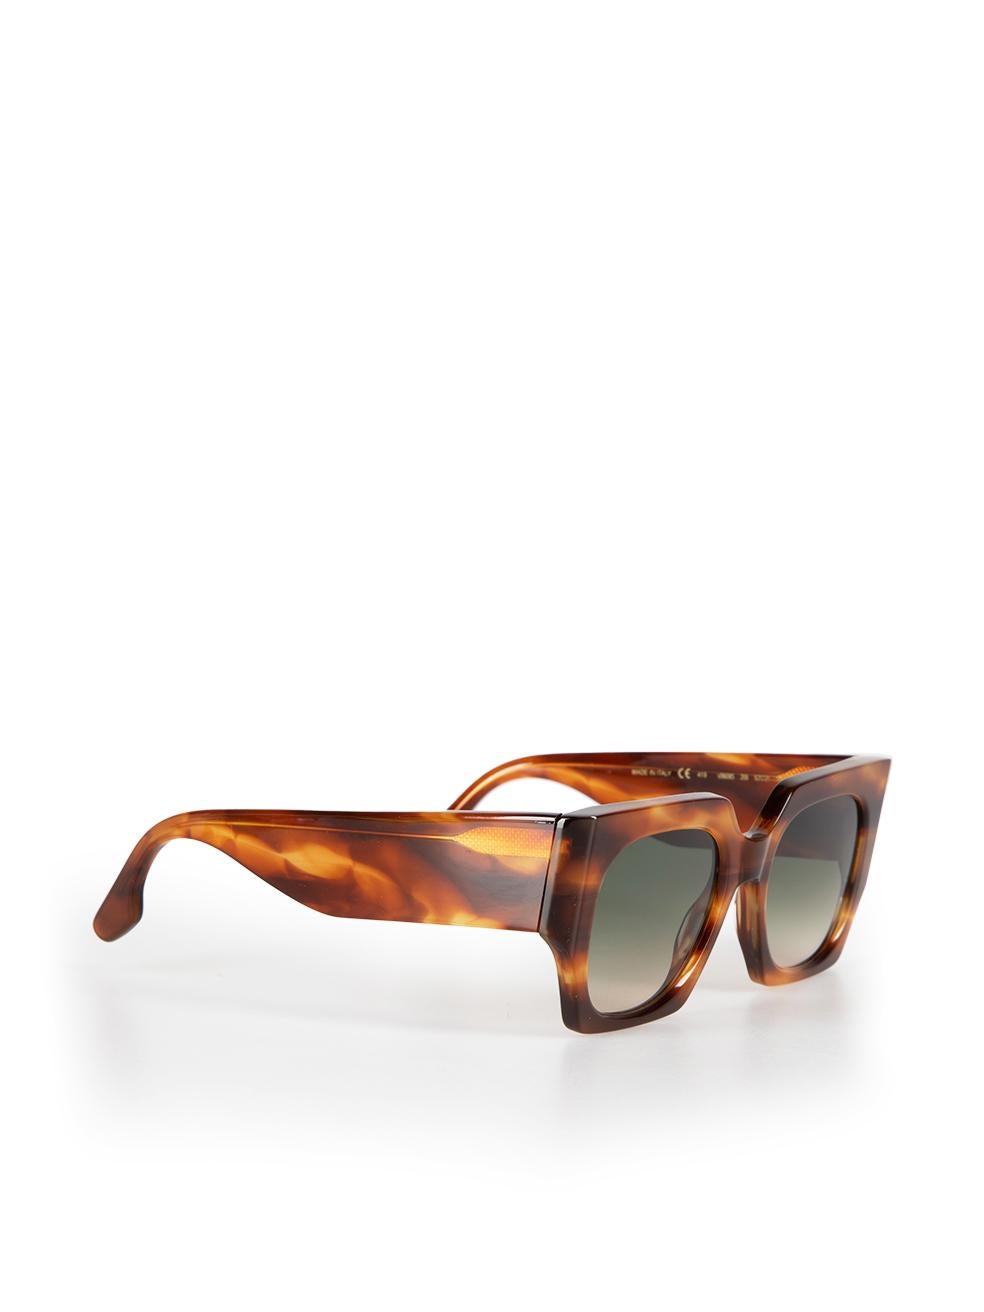 Victoria Beckham Chocolate Smoke Square Sunglasses In New Condition For Sale In London, GB